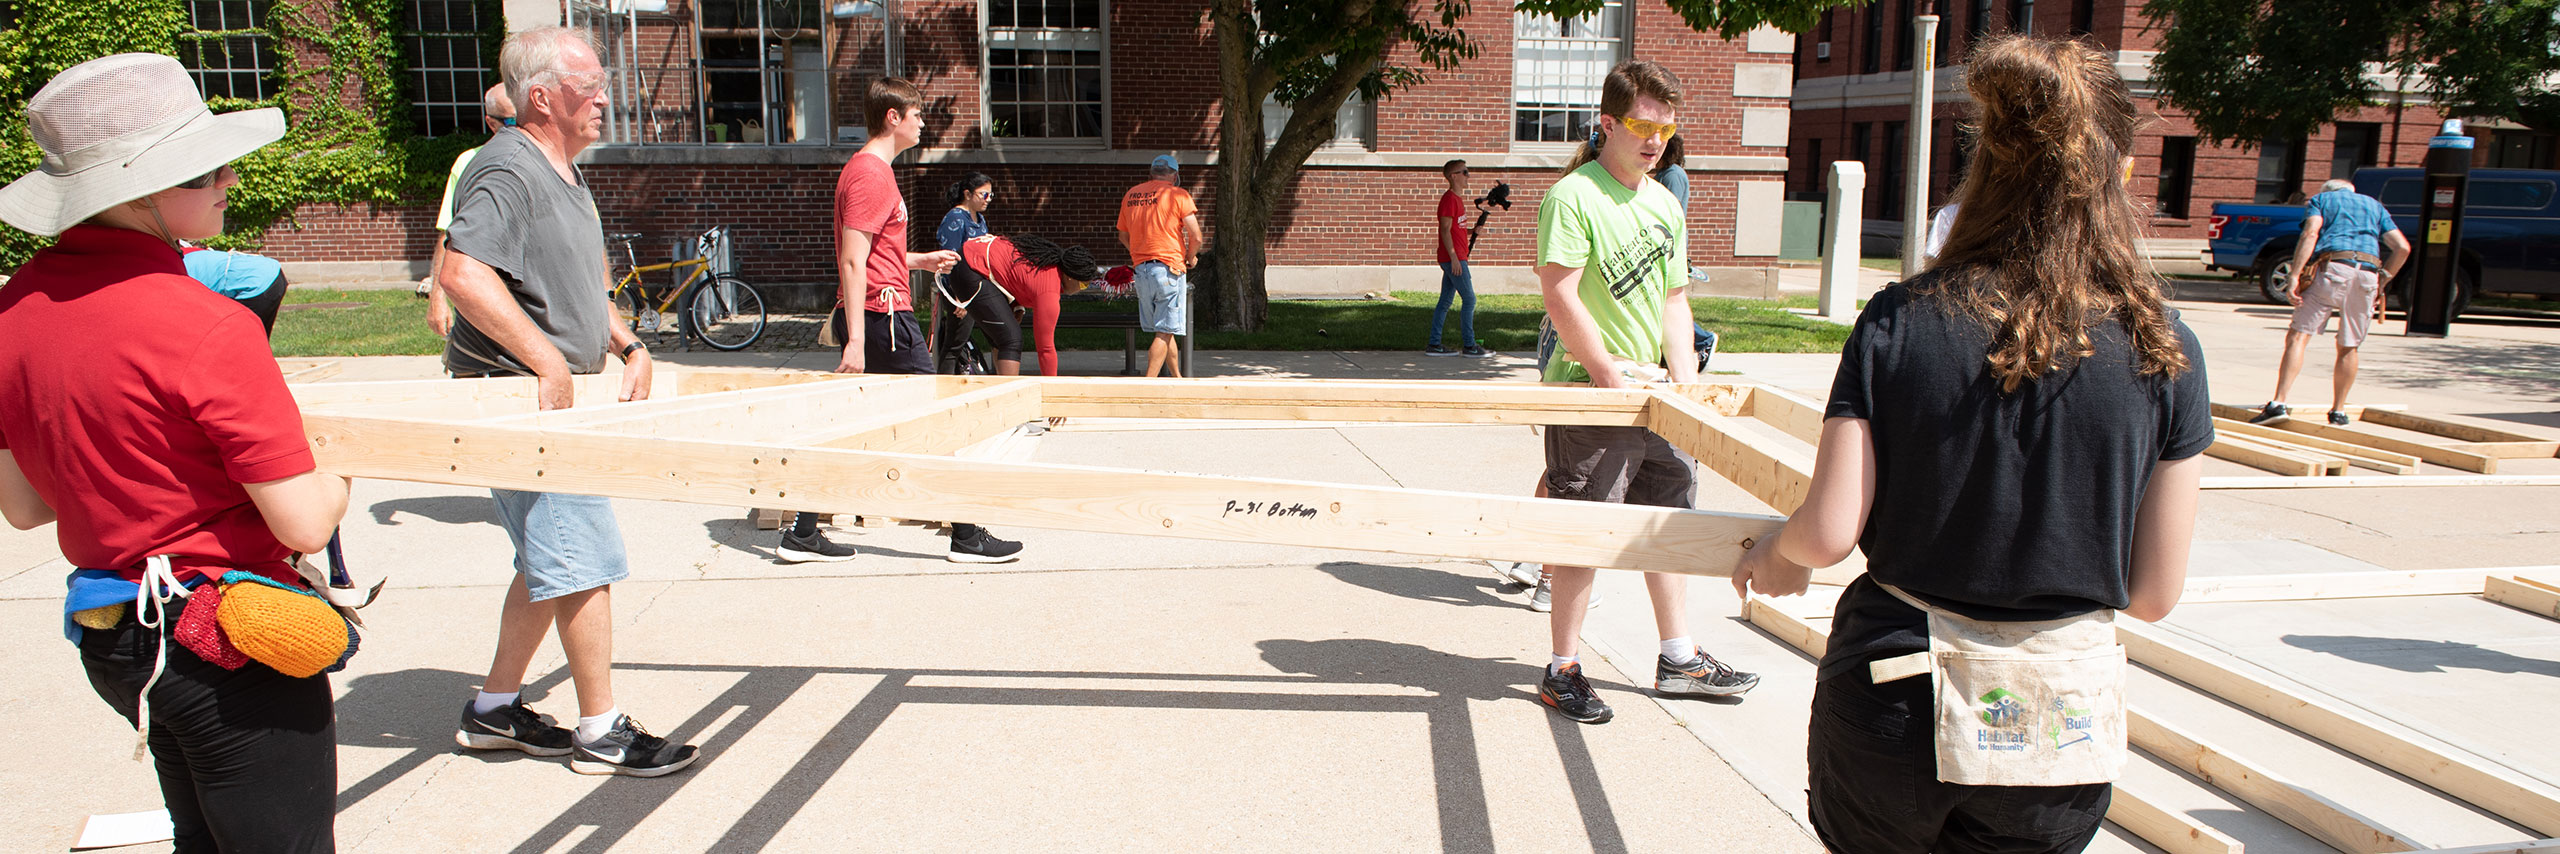 Students and faculty working on habitat for humanity house